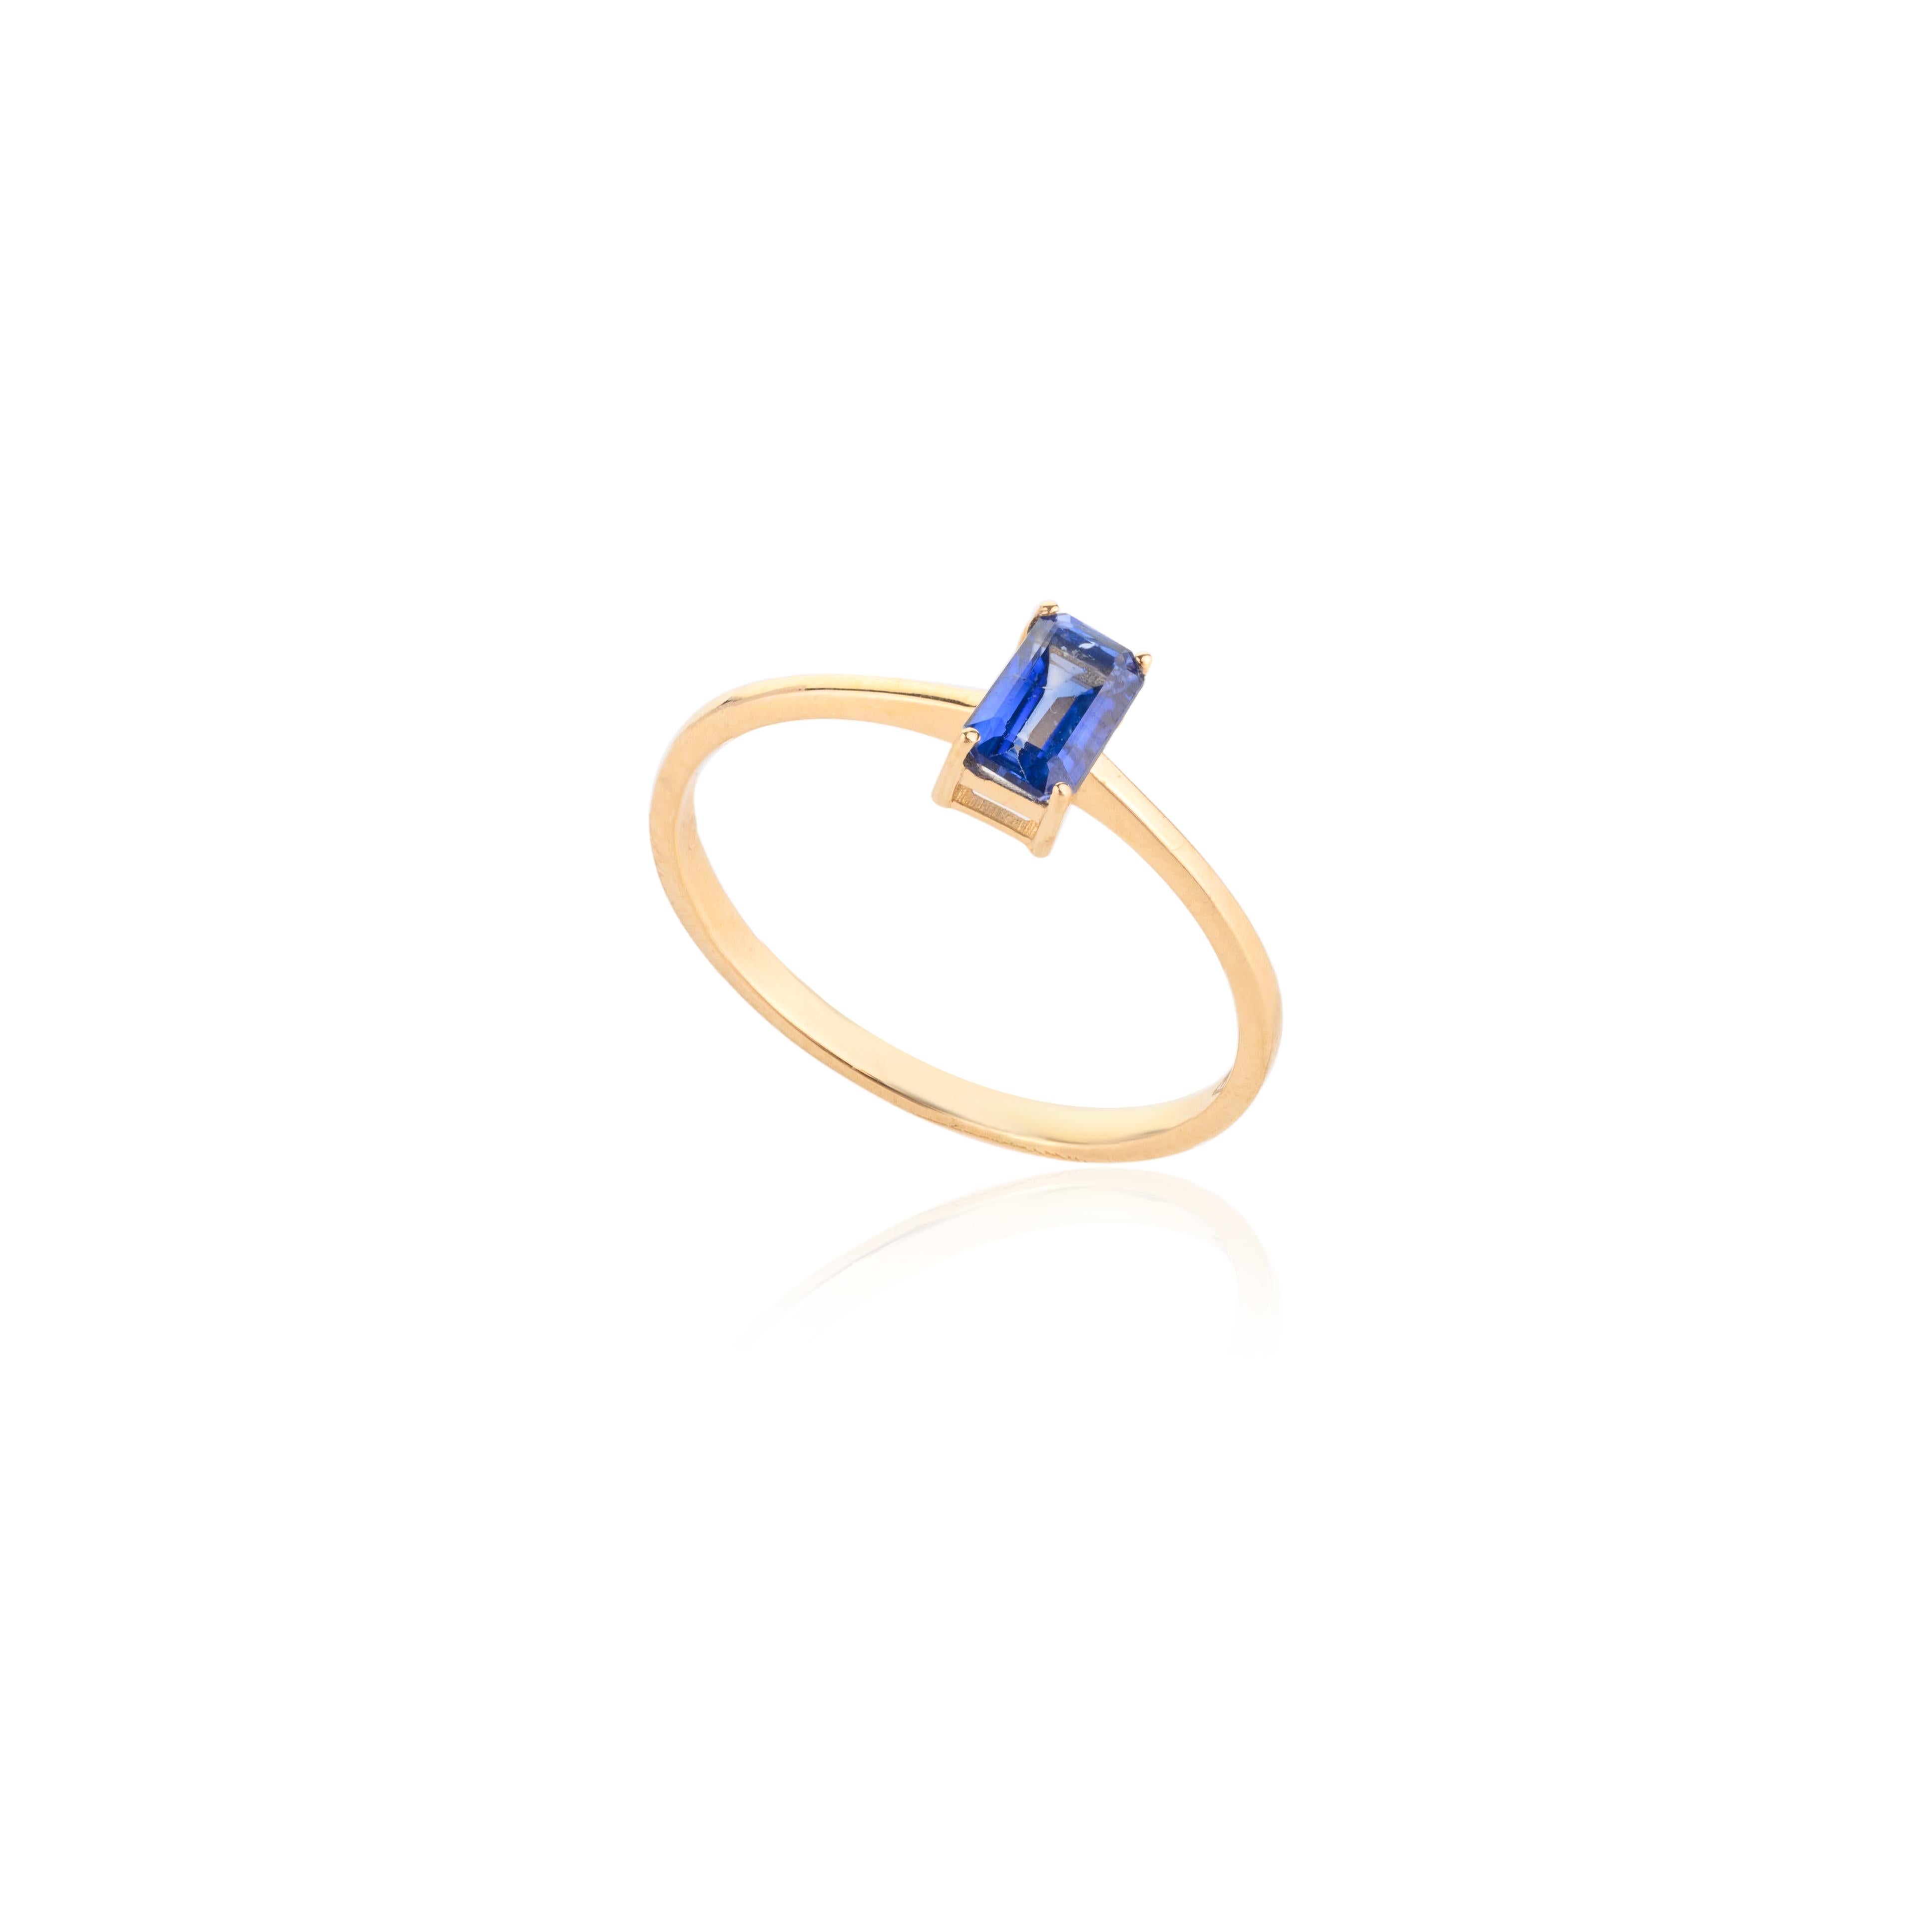 For Sale:  Minimal Baguette Cut Blue Sapphire Ring in 18k Solid Yellow Gold 7